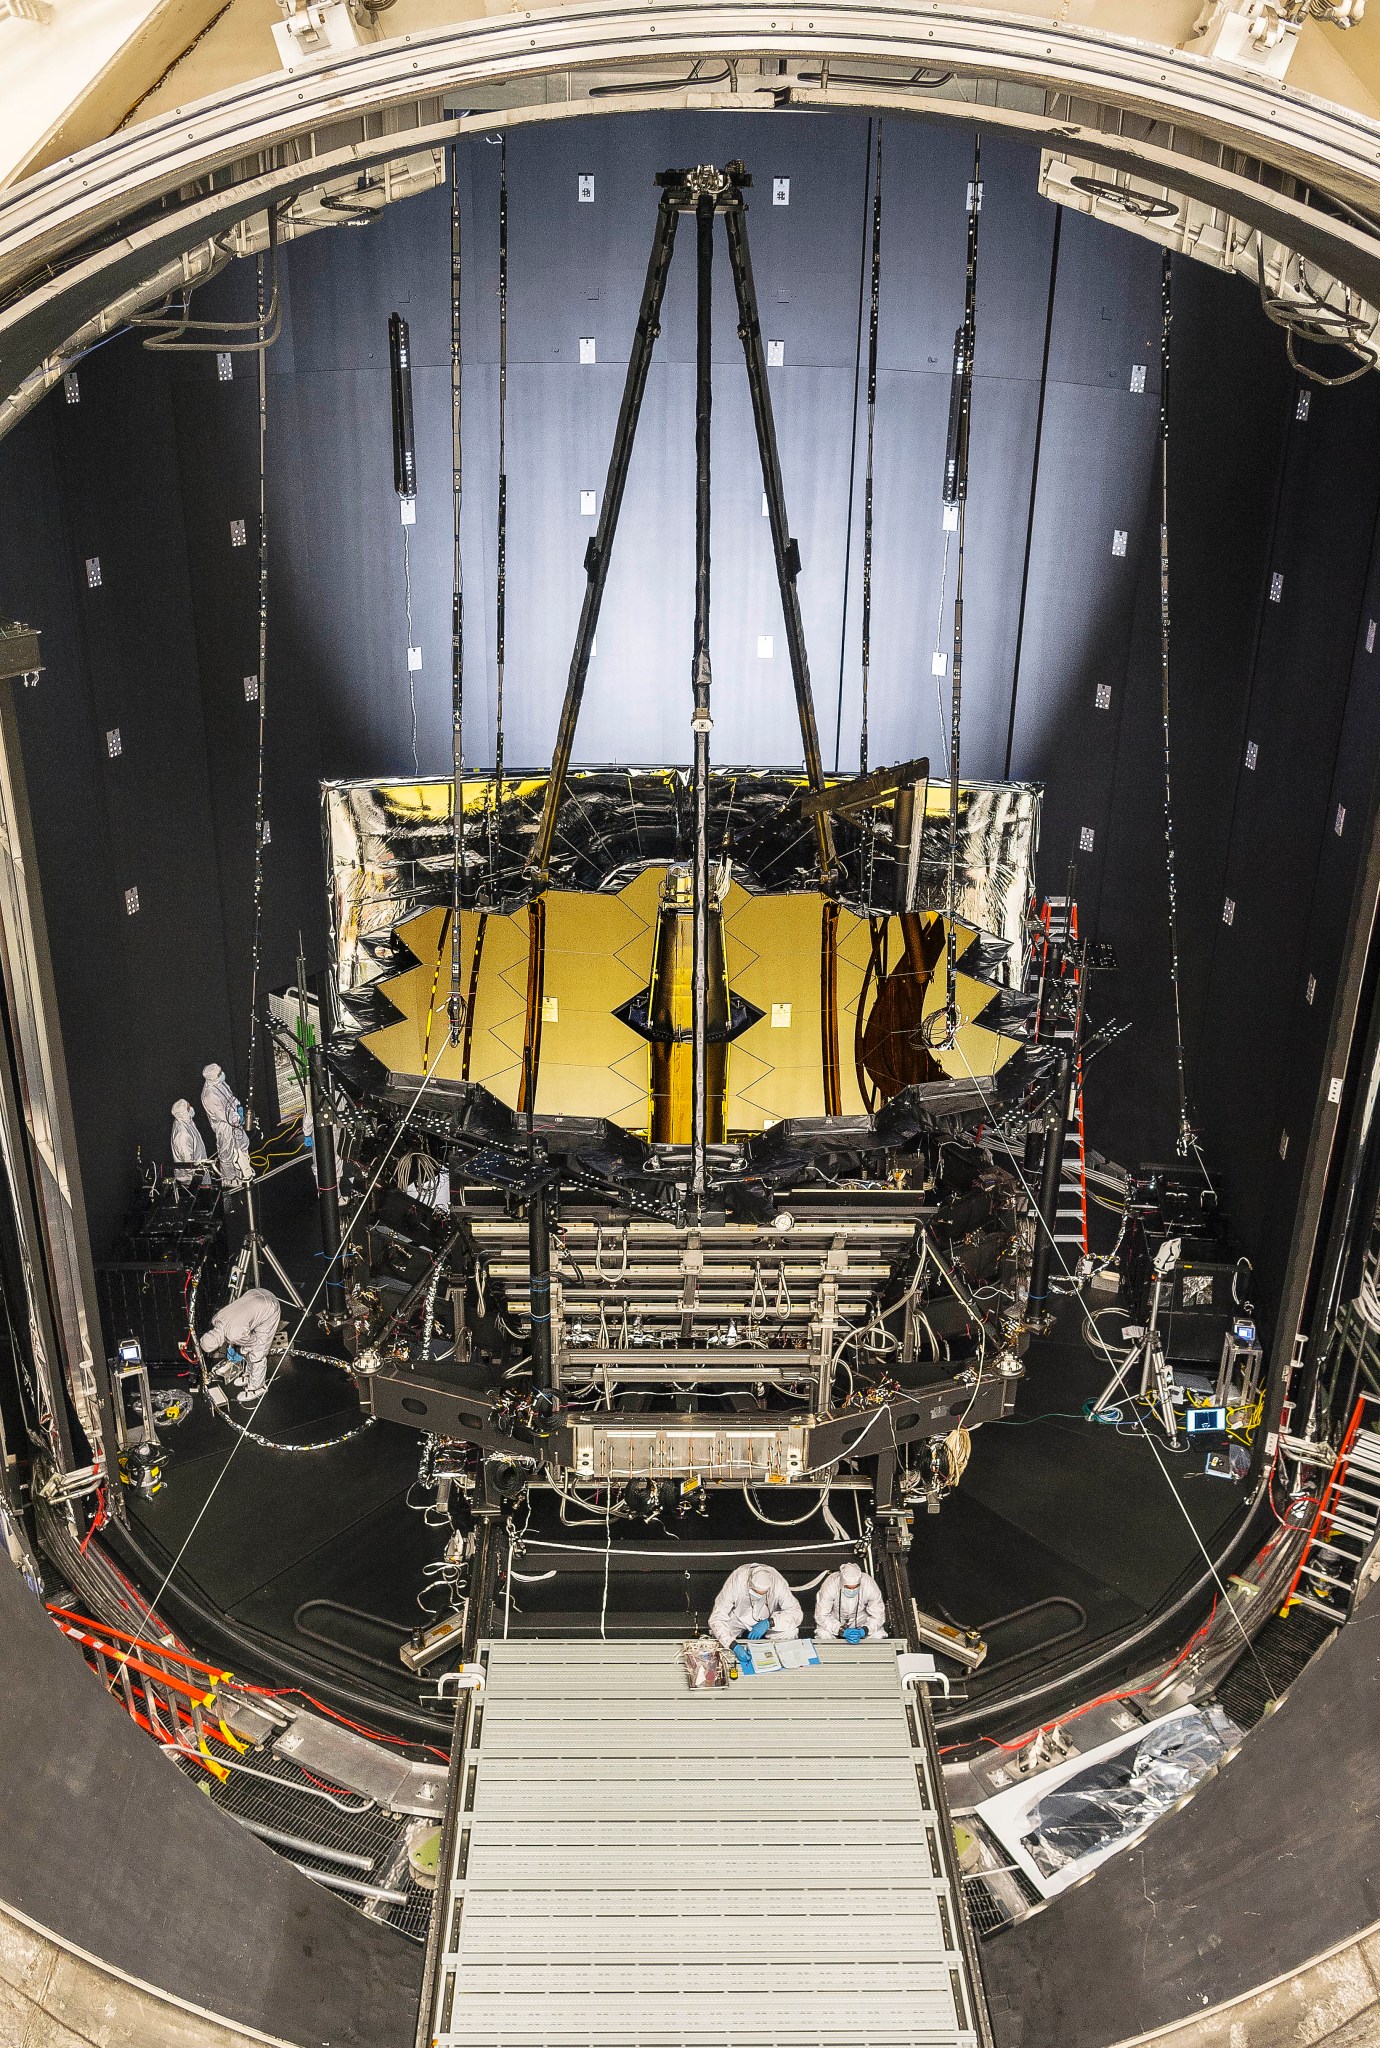 View from above of the Webb telescope's primary and secondary mirror structures in a round chamber with a big circular door.